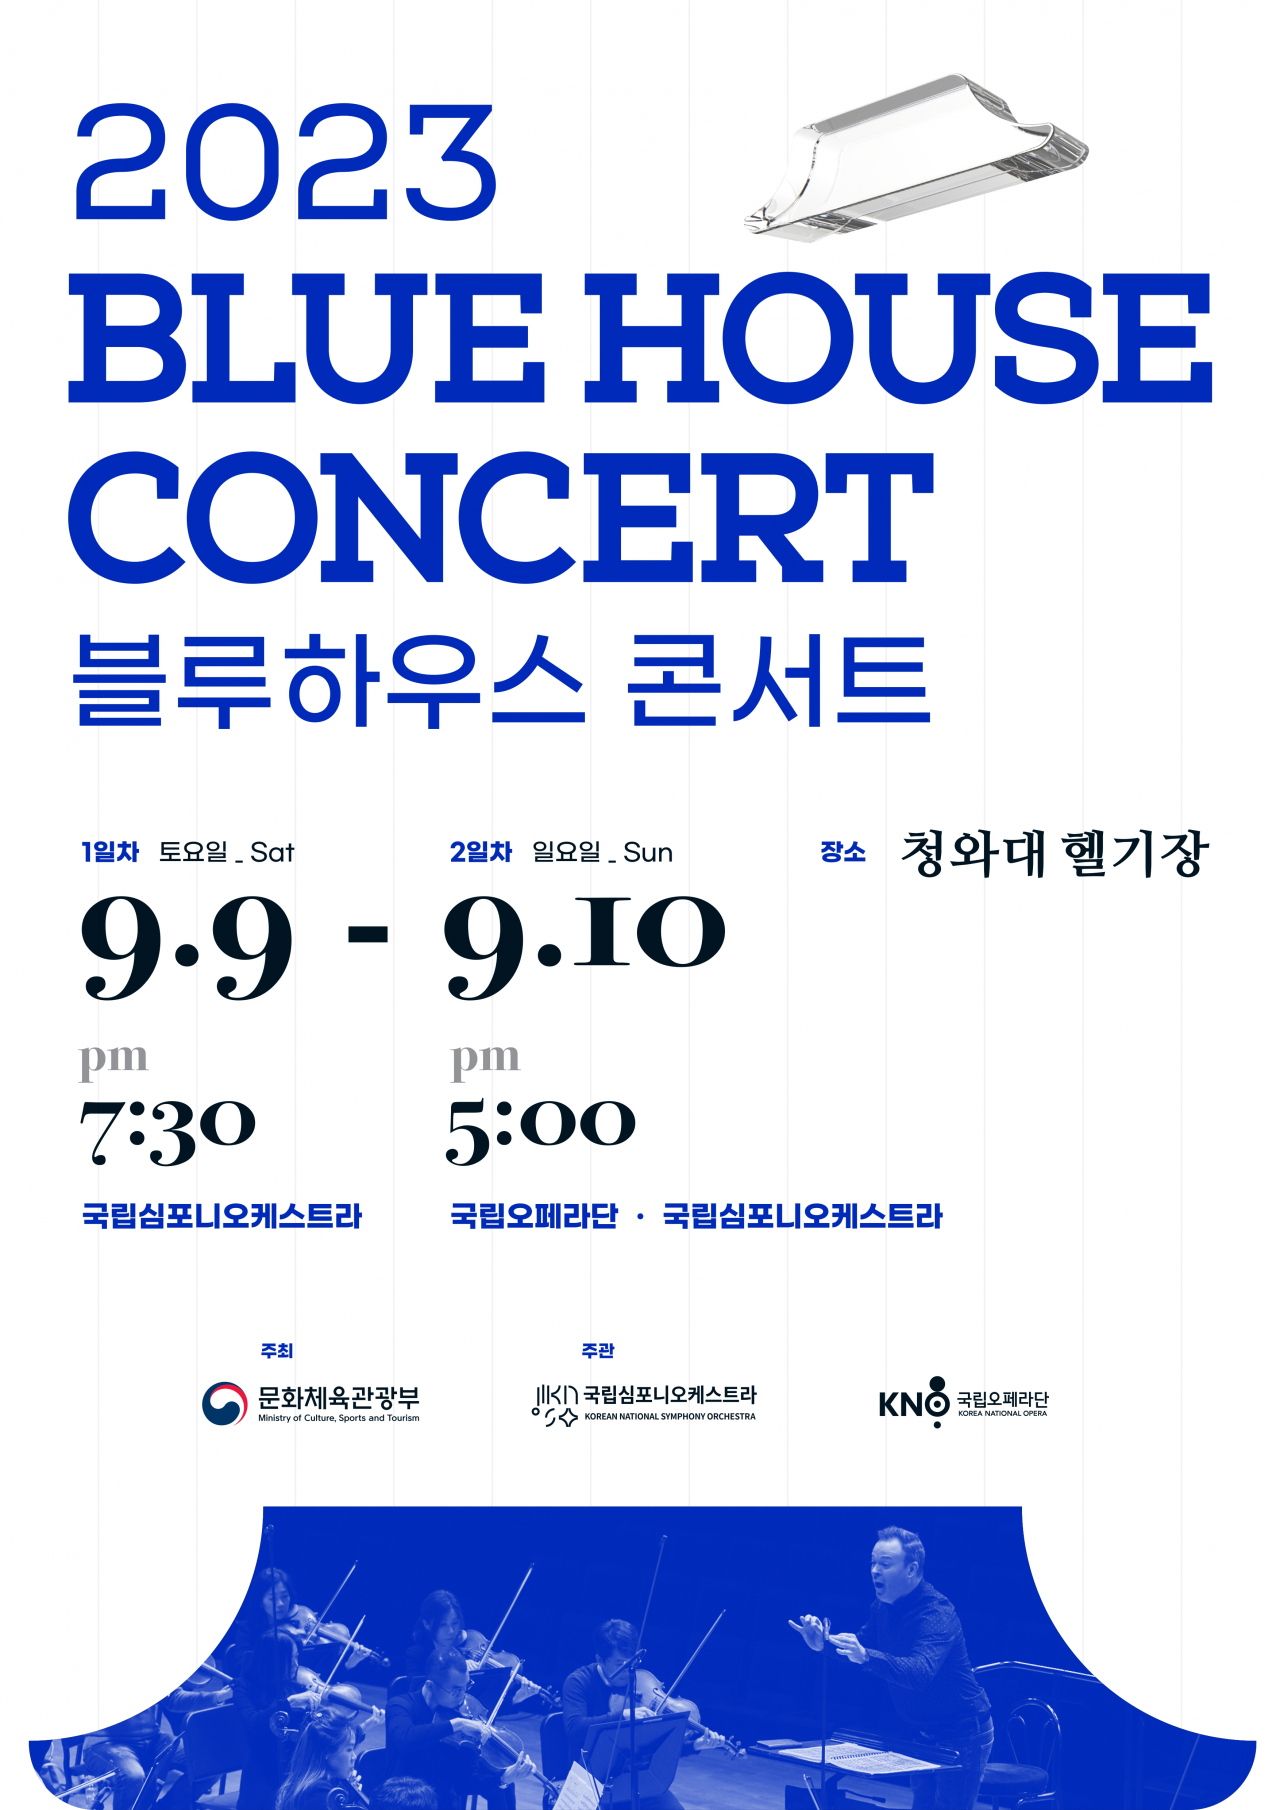 Poster for the 2023 Blue House Concert (MCST)